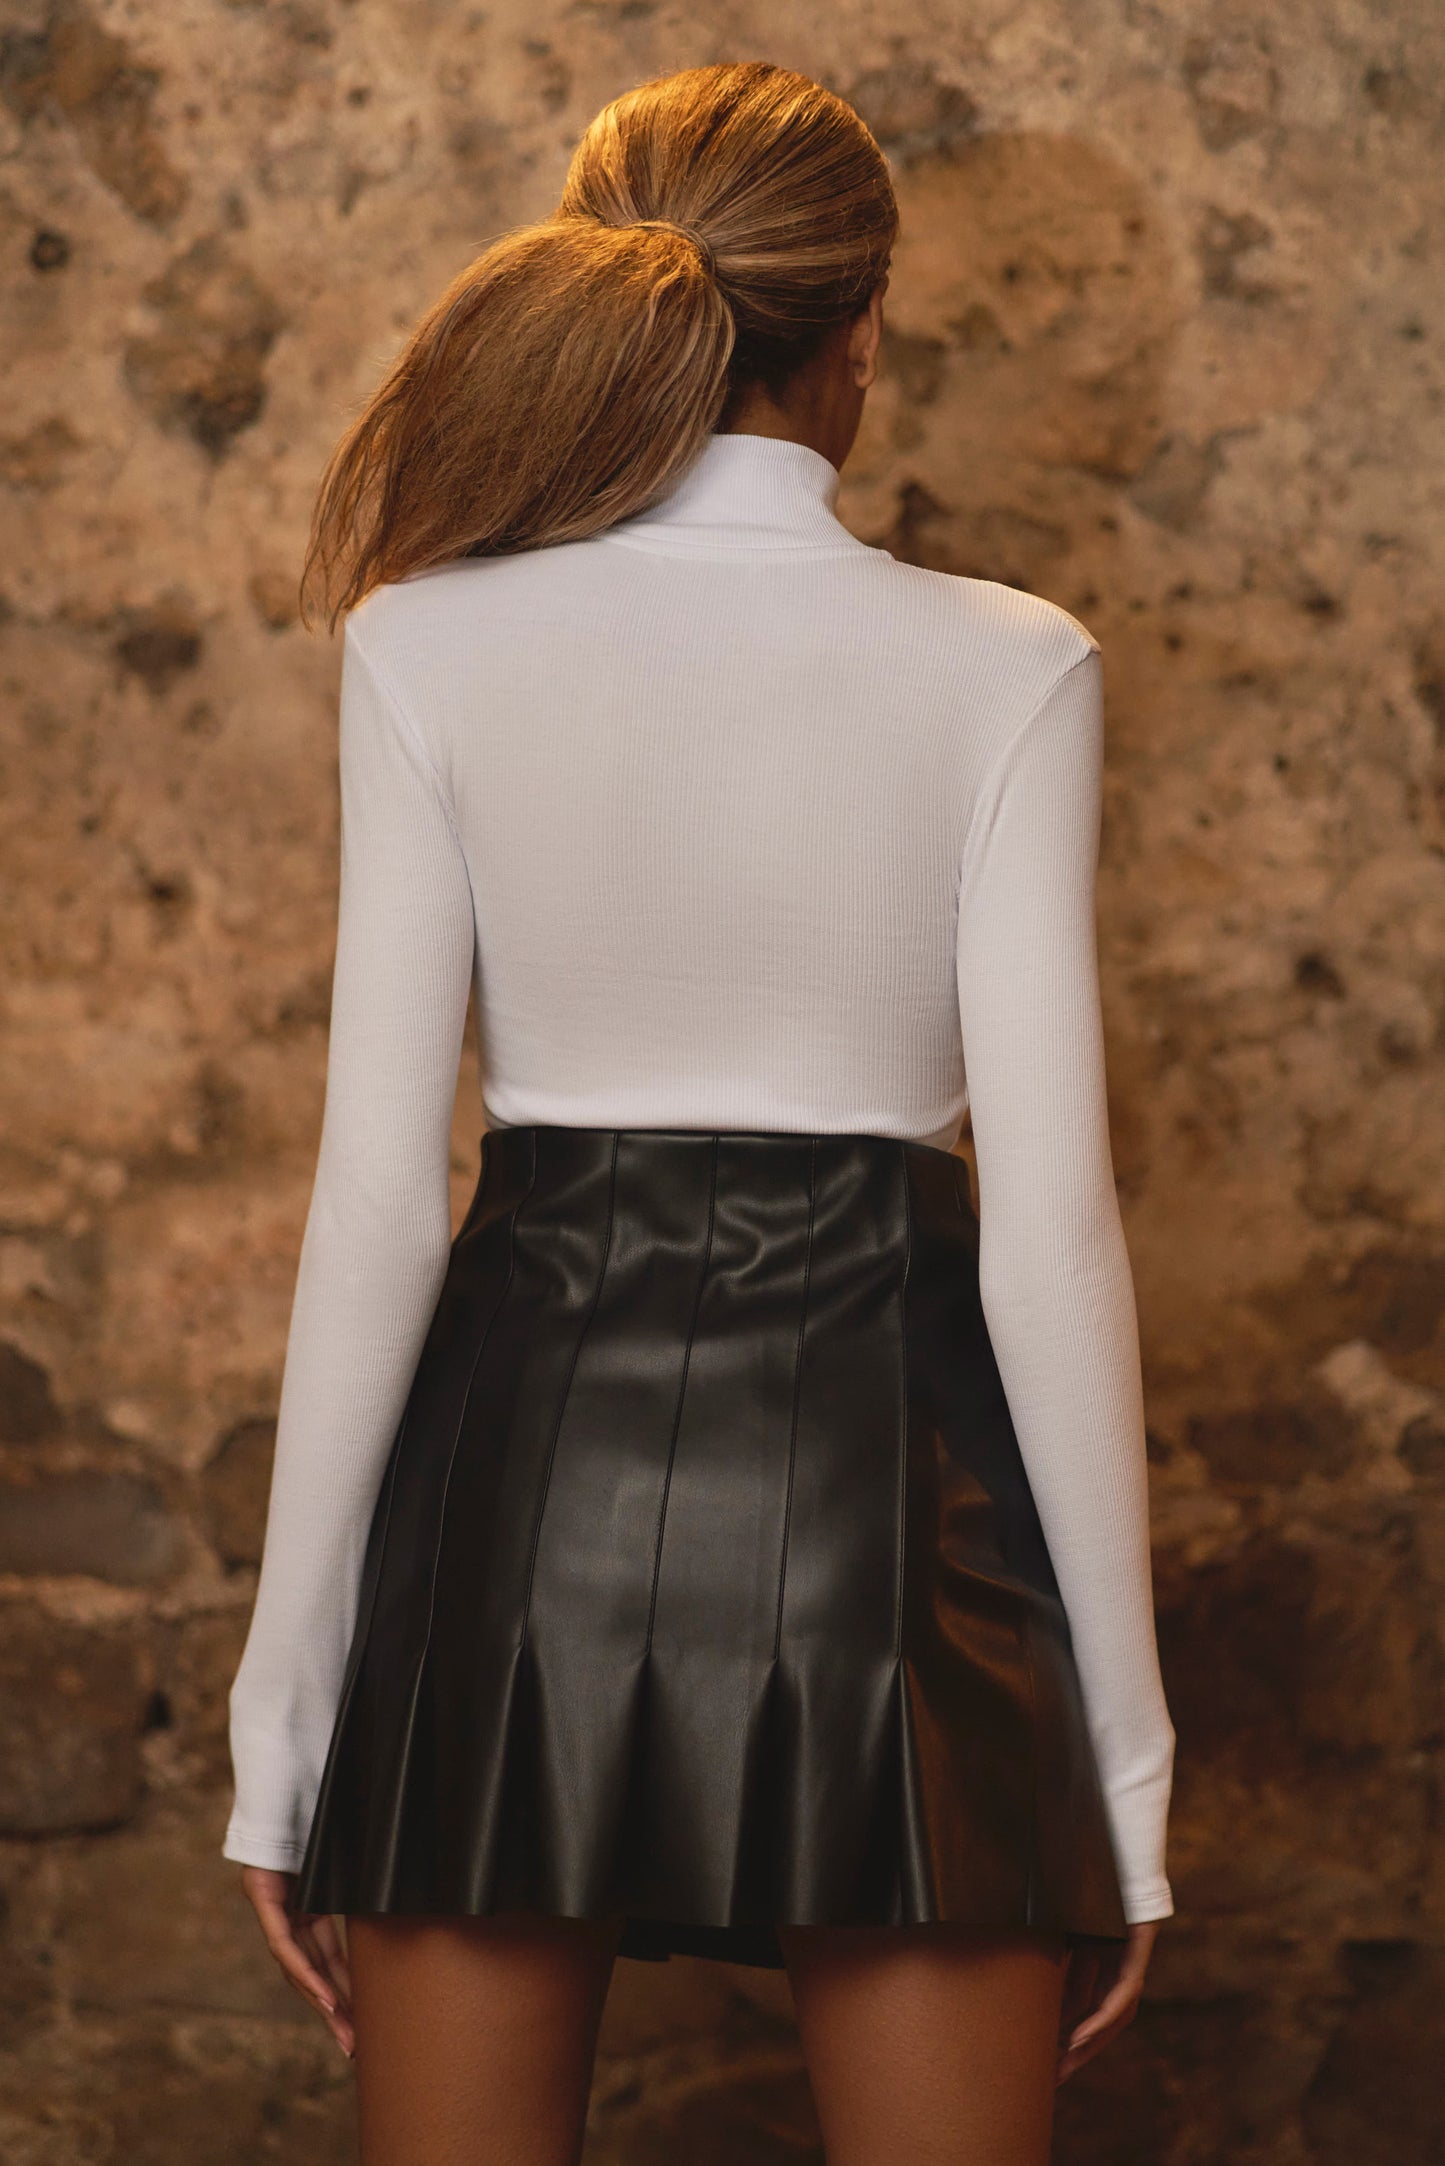 back view of model wearing luxury leather pleated skirt and white bodysuit